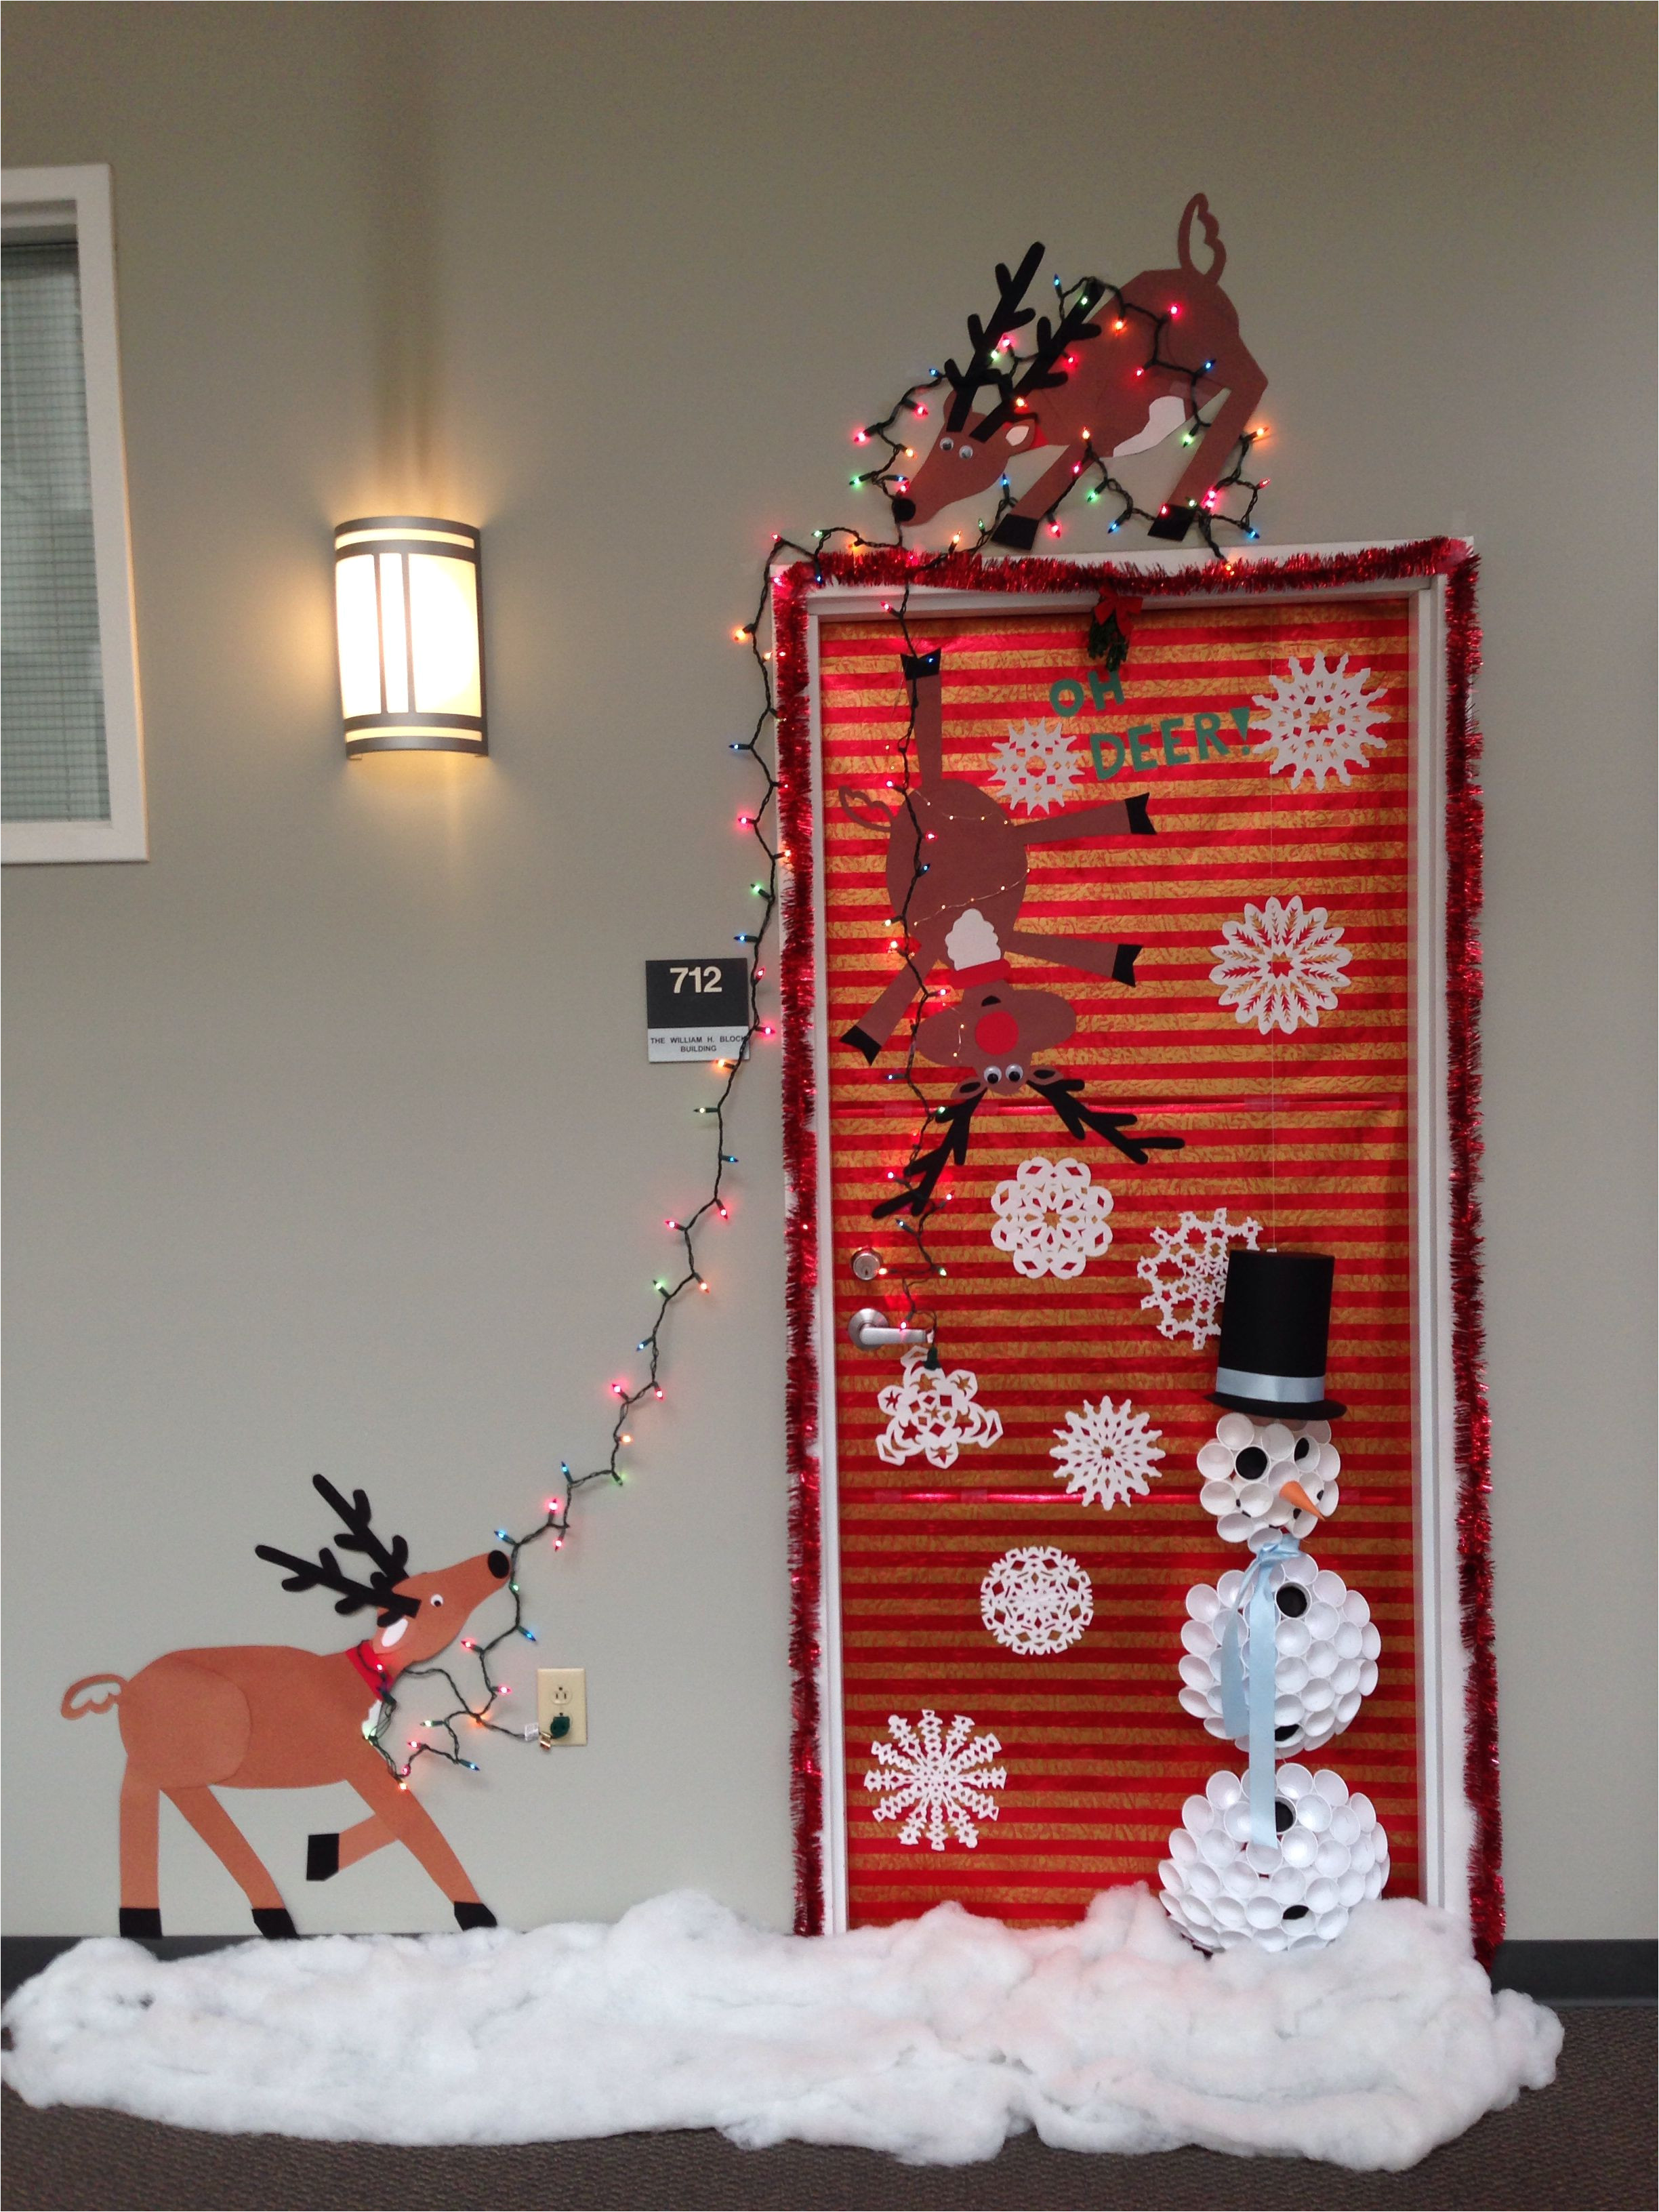 our christmas door decoration first place made snowman with dixie cups reindeer from construction paper snow from sewing fluff